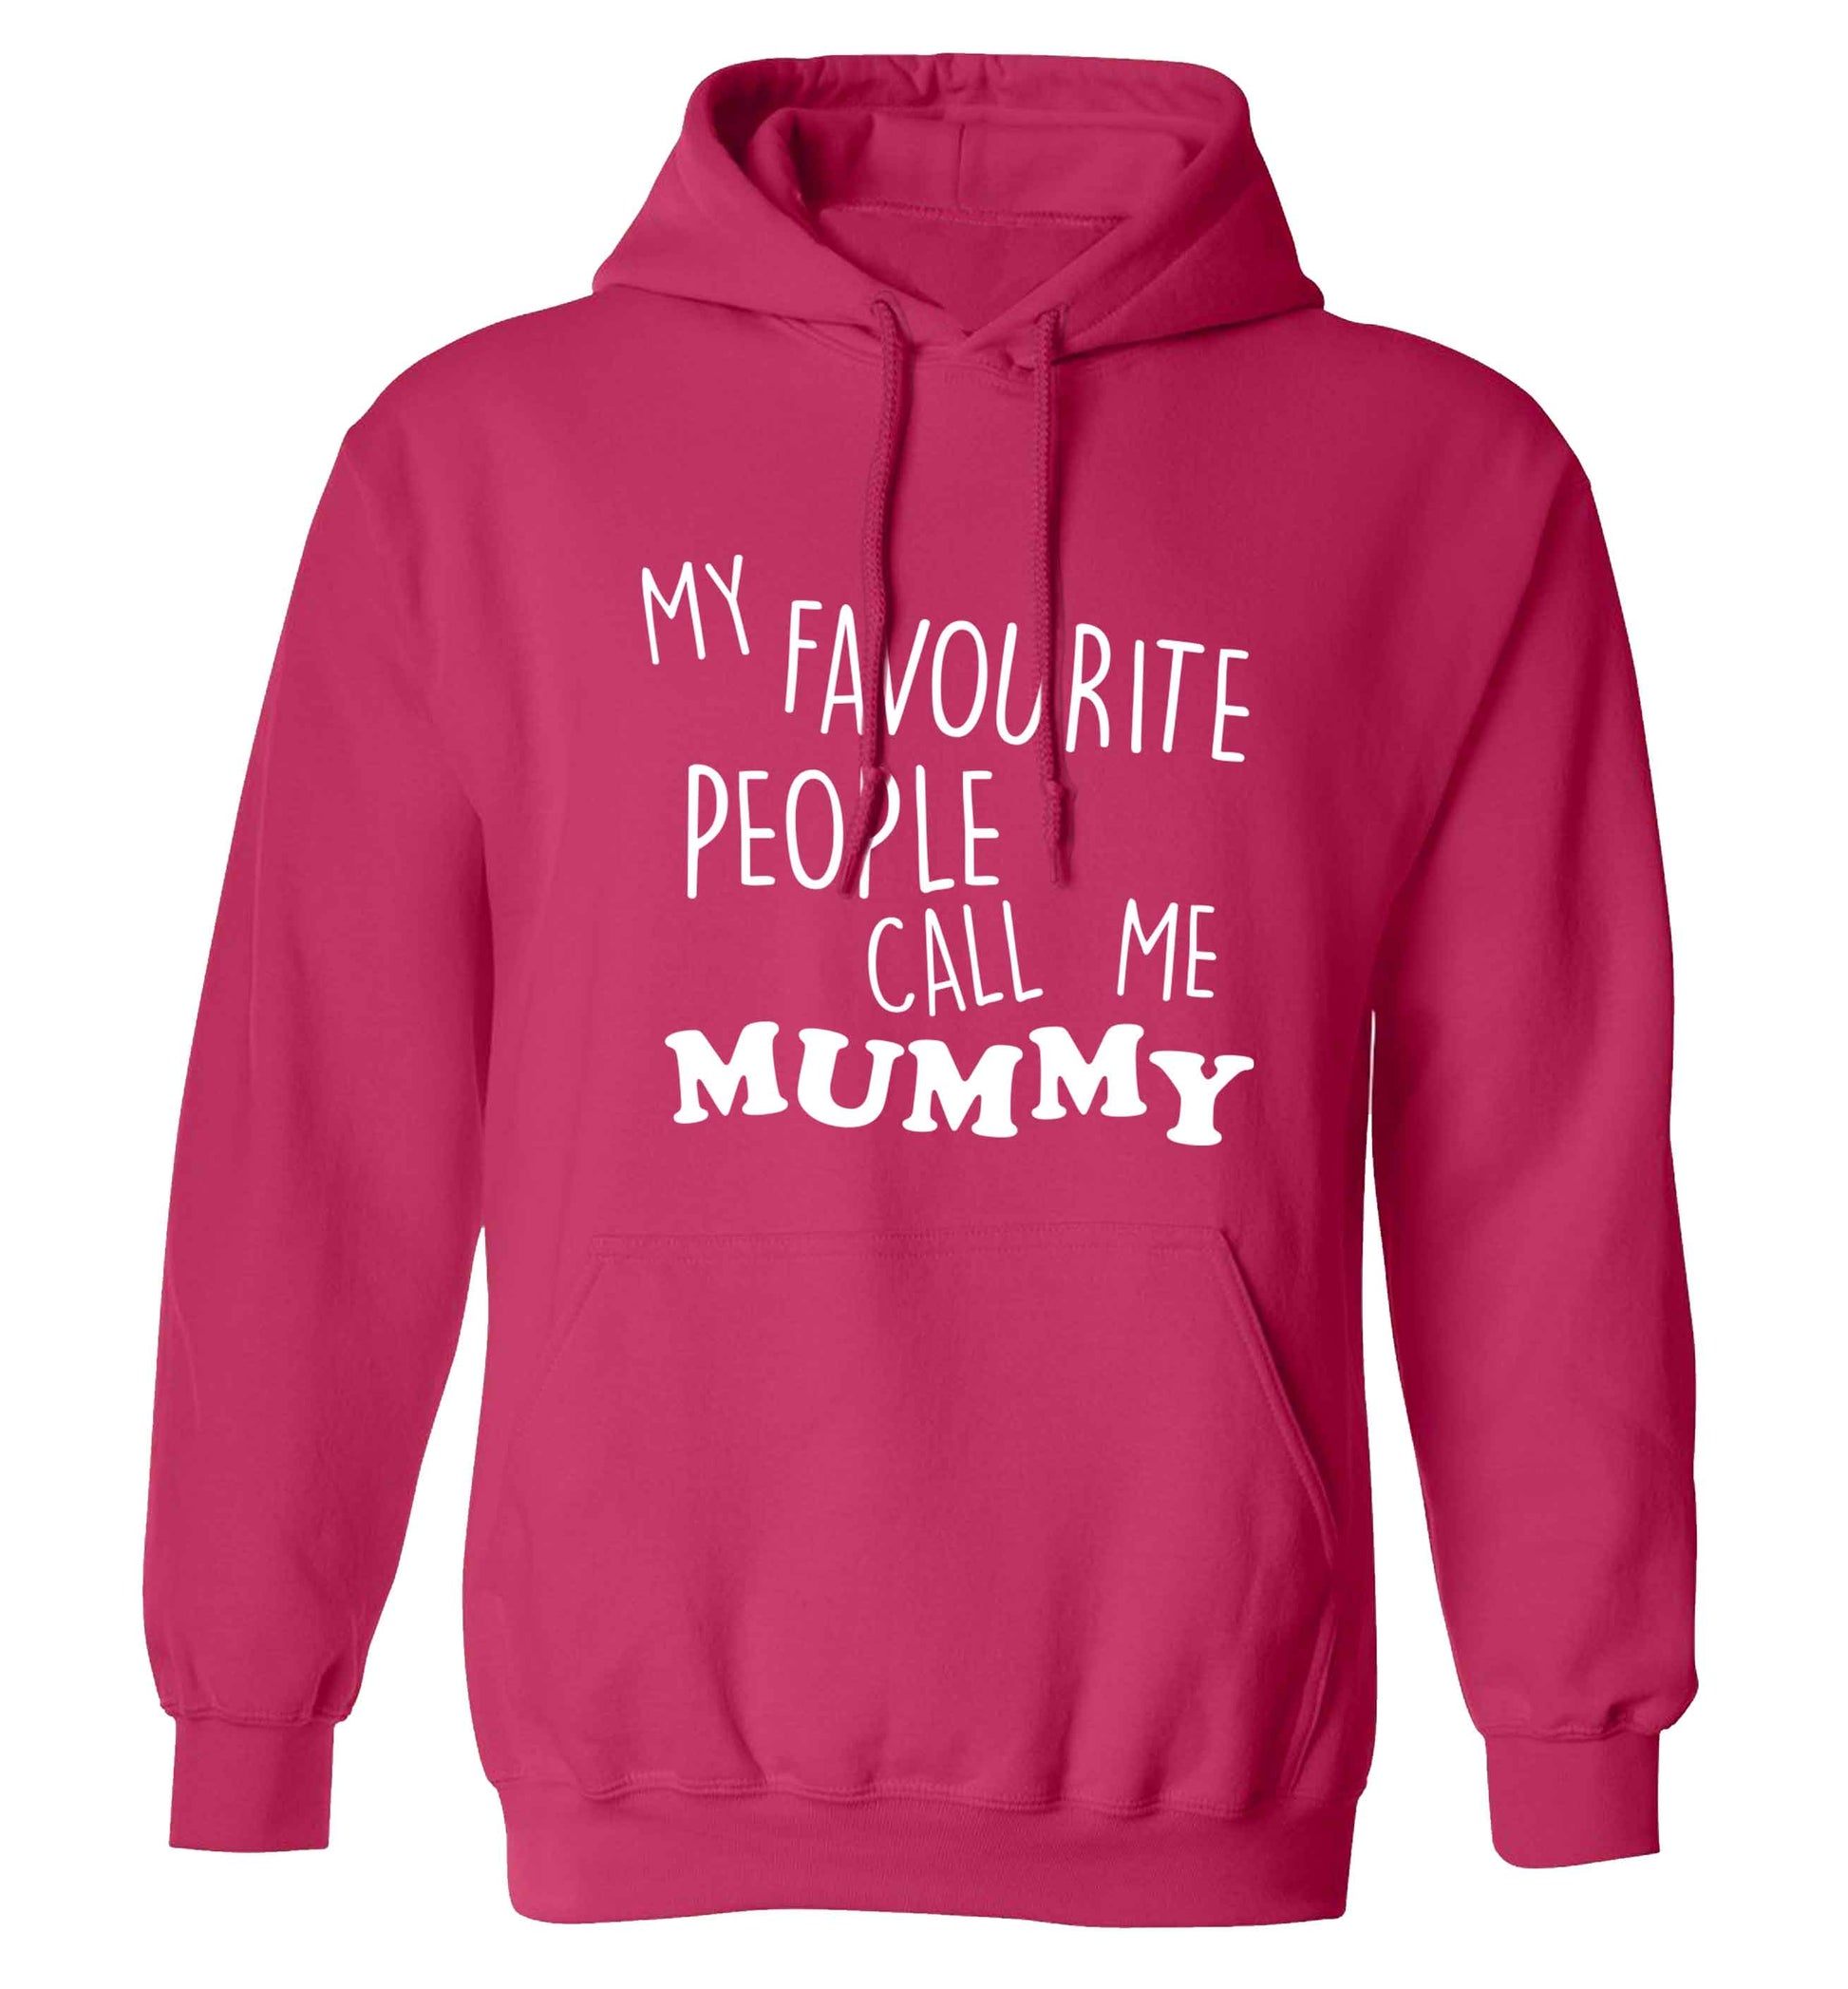 My favourite people call me mummy adults unisex pink hoodie 2XL